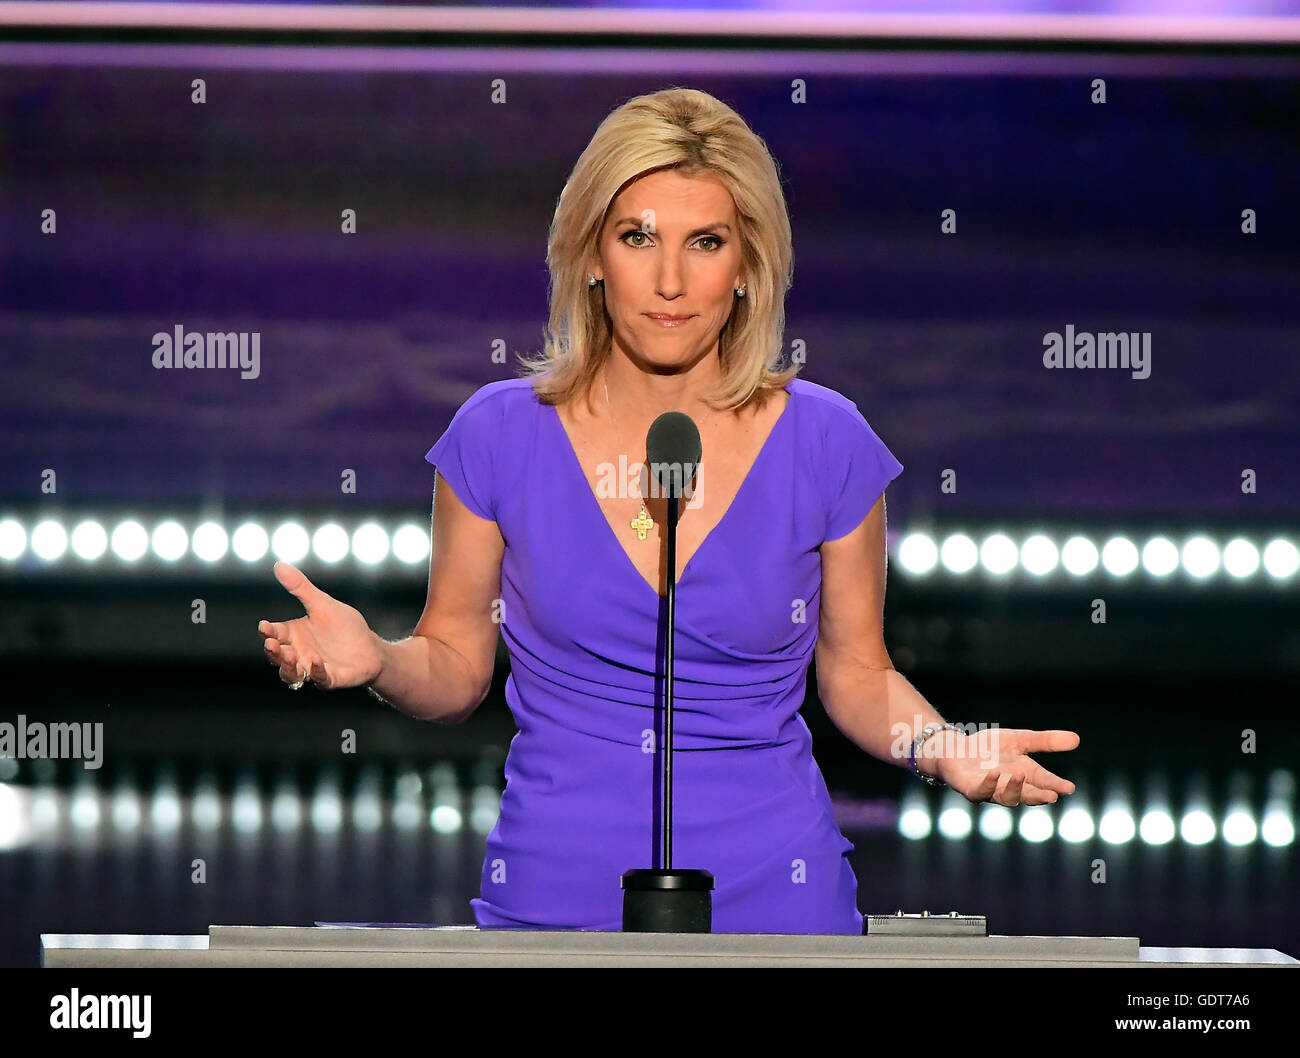 Cleveland, Us. 20th July, 2016. Laura Ingraham, Conservative Political Commentator, makes remarks at the 2016 Republican National Convention held at the Quicken Loans Arena in Cleveland, Ohio on Wednesday, July 20, 2016. Credit: Ron Sachs/CNP (RESTRICTION: NO New York or New Jersey Newspapers or newspapers within a 75 mile radius of New York City) - NO WIRE SERVICE - © dpa/Alamy Live News Stock Photo